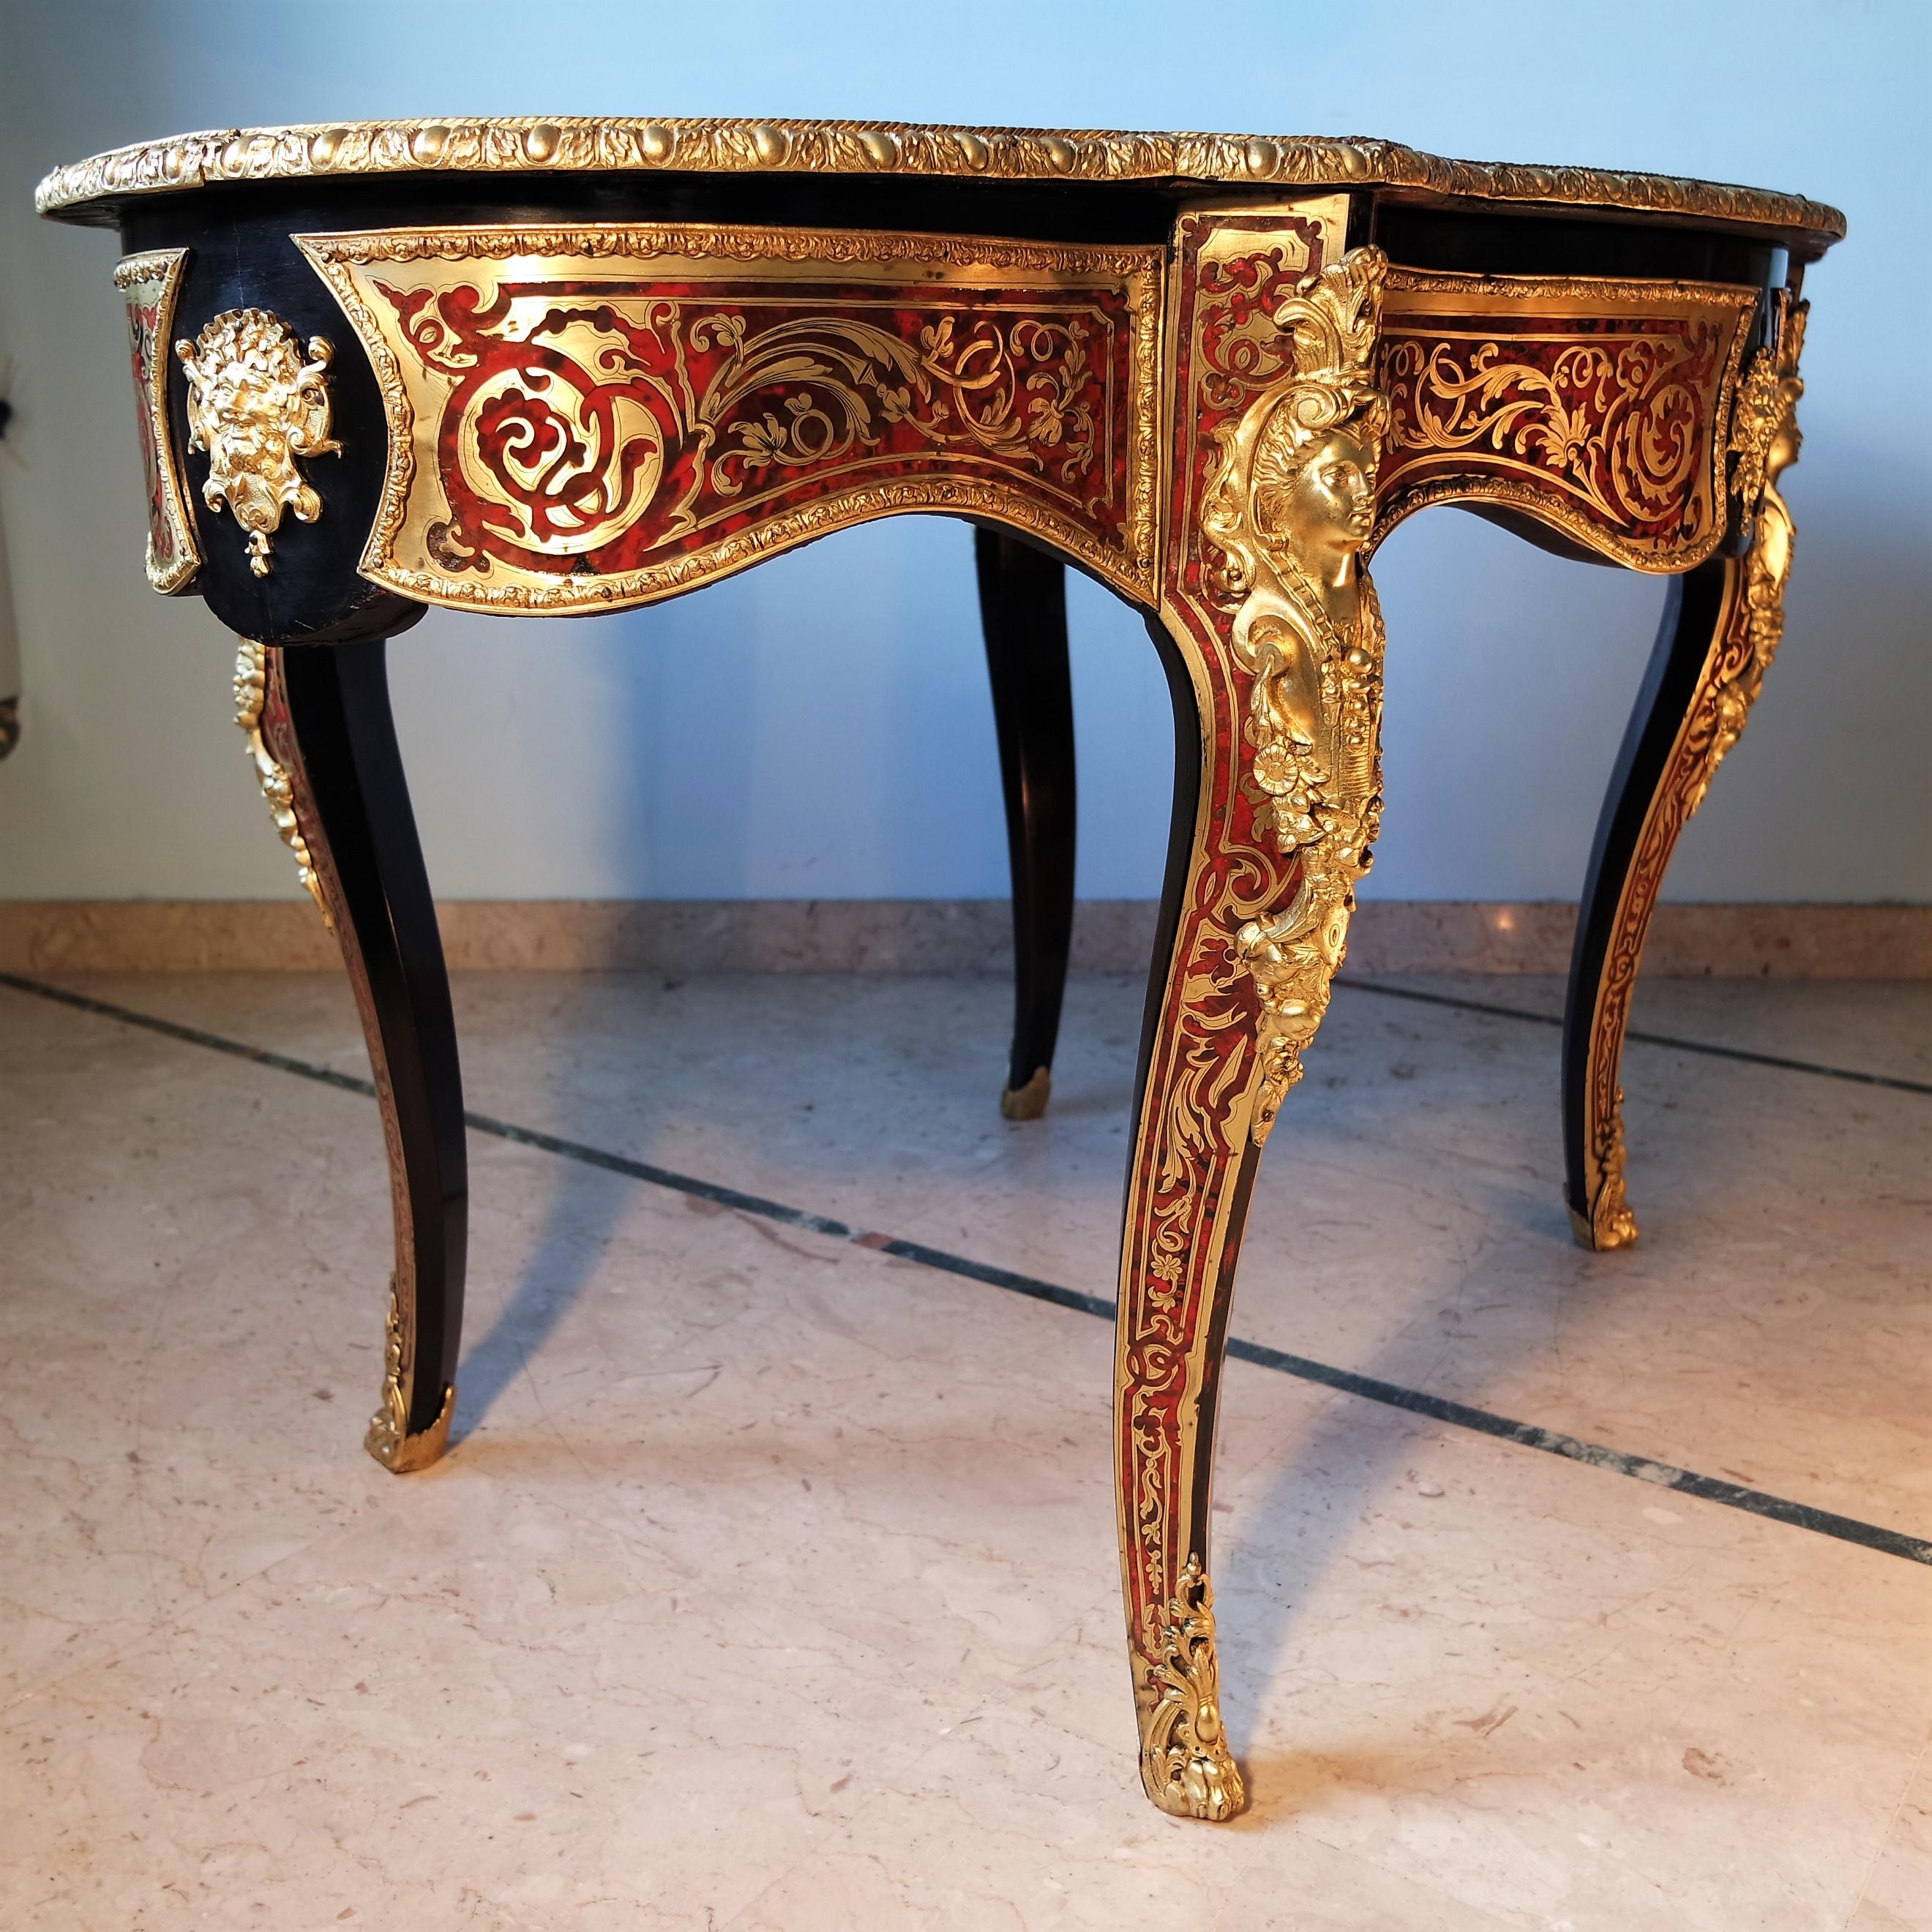 A rare and elegant Boulle style Bureau Plat inlaid with red tortoise and brass, engraved with arabesque motifs.
It is supported by four cabriolé rocaille legs.
In the belt, it has a drawer with a key.
Rich ornamentation of gilded bronzes and